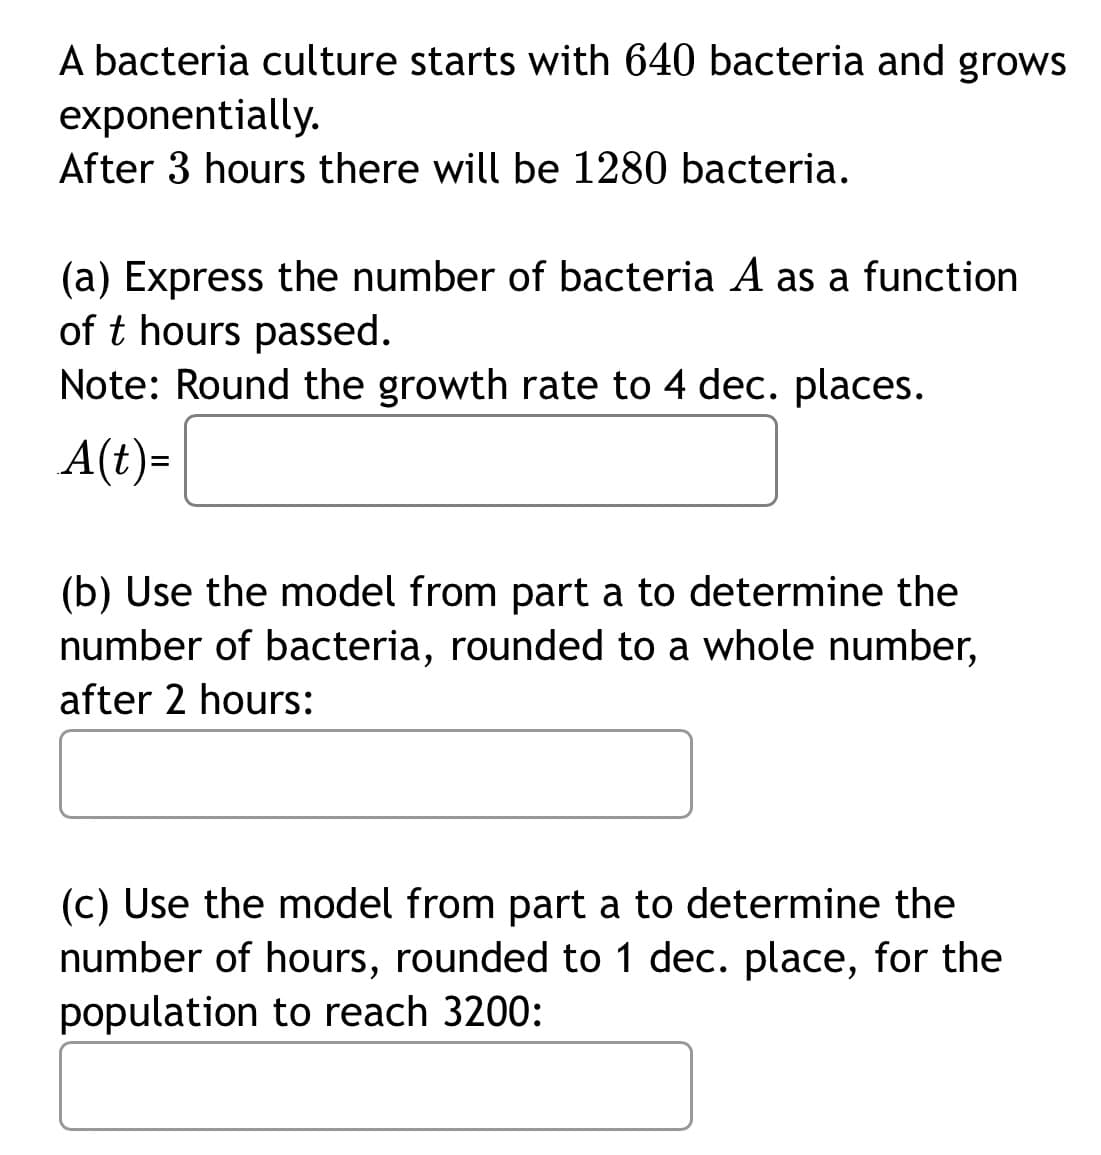 A bacteria culture starts with 640 bacteria and grows
exponentially.
After 3 hours there will be 1280 bacteria.
(a) Express the number of bacteria A as a function
of t hours passed.
Note: Round the growth rate to 4 dec. places.
A(t)=
(b) Use the model from part a to determine the
number of bacteria, rounded to a whole number,
after 2 hours:
(c) Use the model from part a to determine the
number of hours, rounded to 1 dec. place, for the
population to reach 3200:
